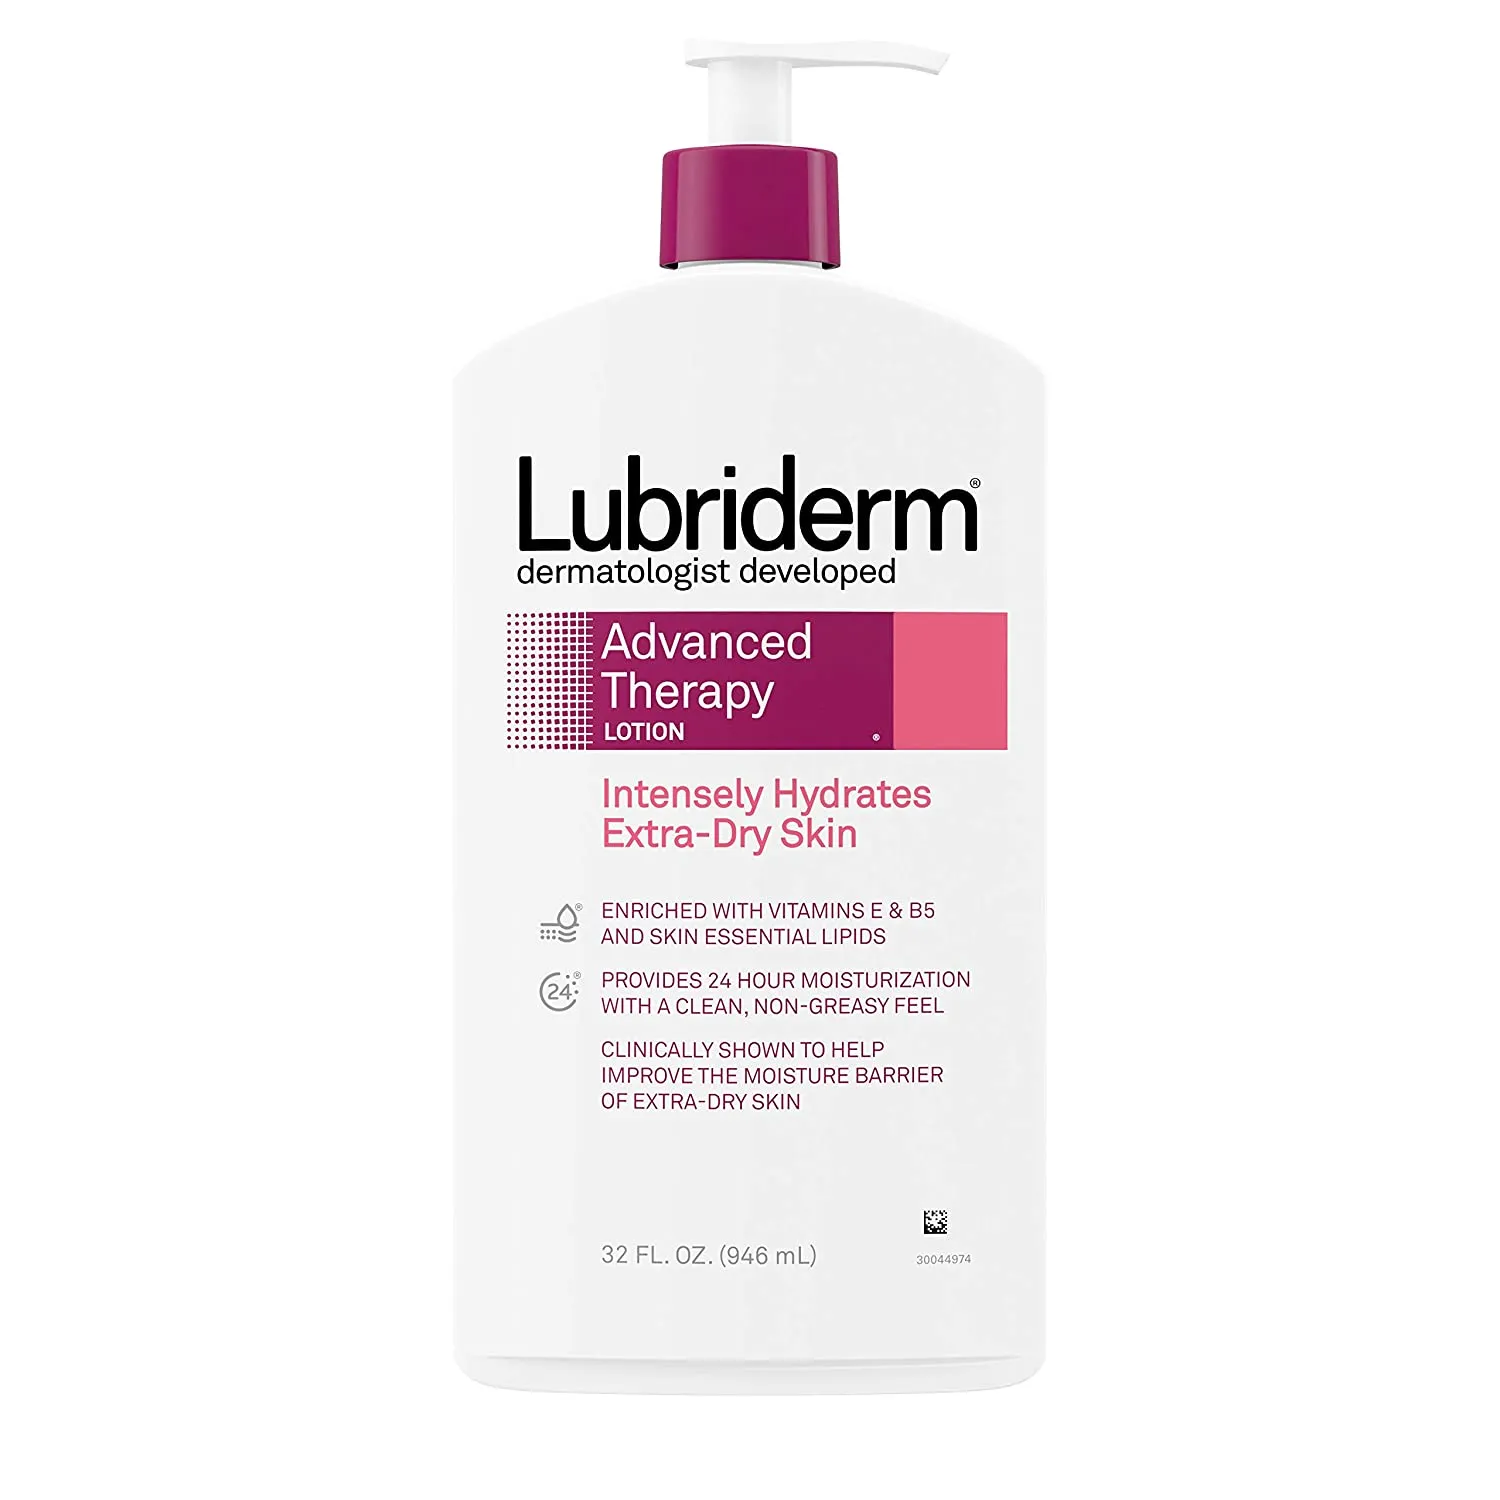 A close second in the Cetaphil vs Lubriderm comparison, the Advanced Therapy Lotion by Lubriderm